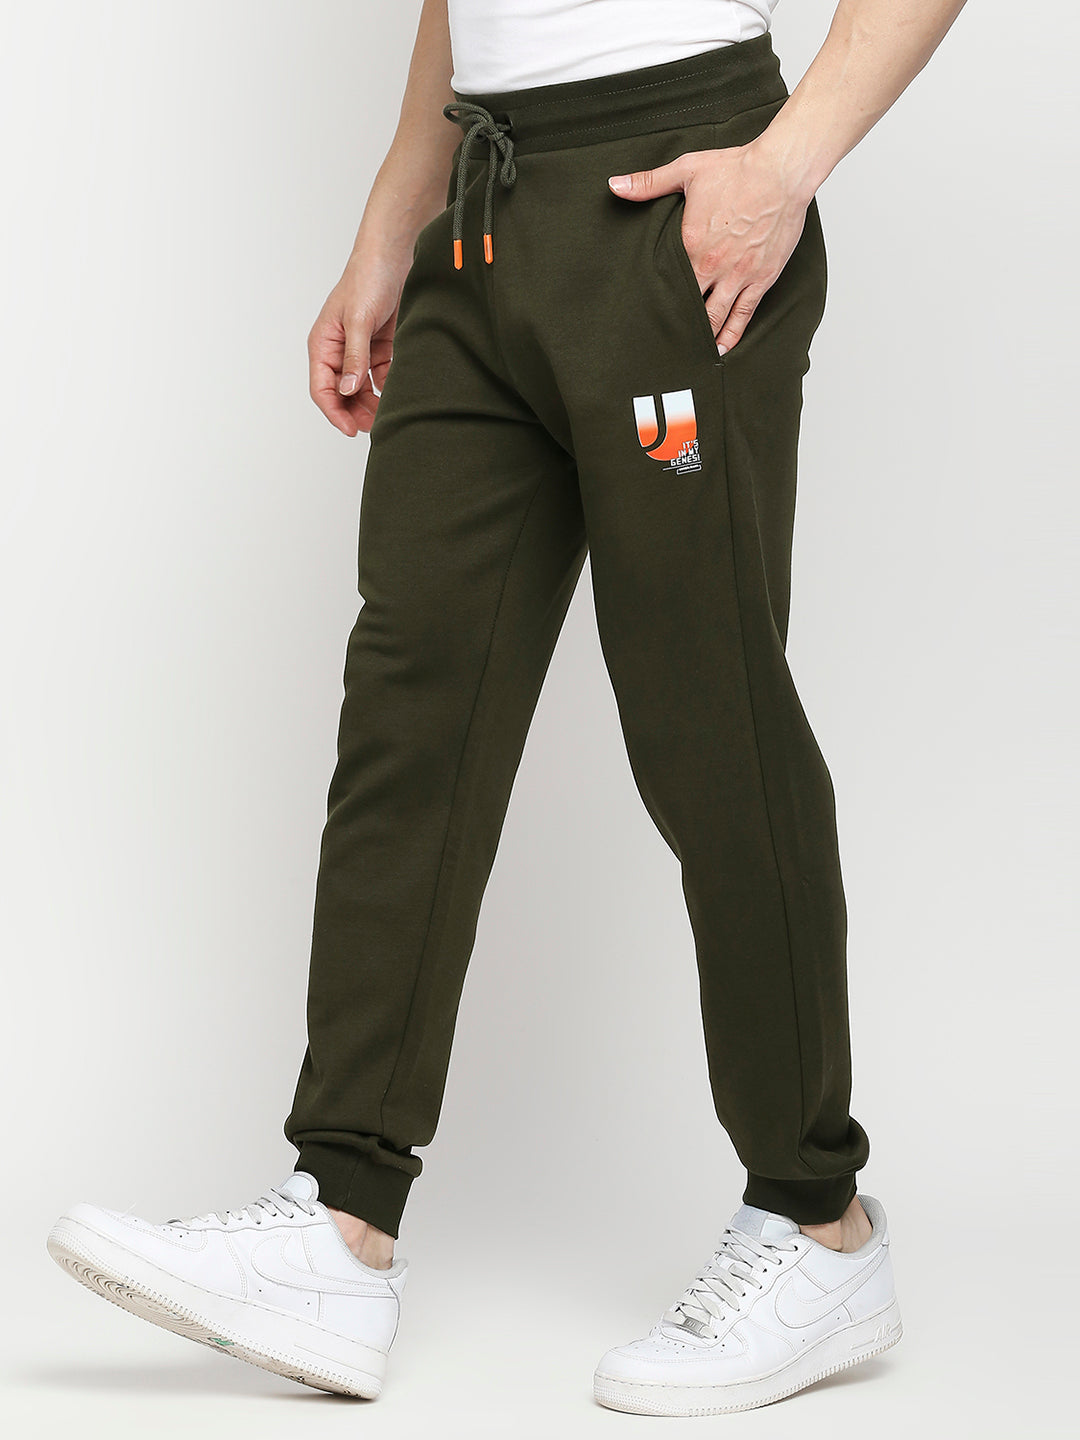 Men Cotton Blend Knitted Rifle Green Trackpant- Underjeans by Spykar